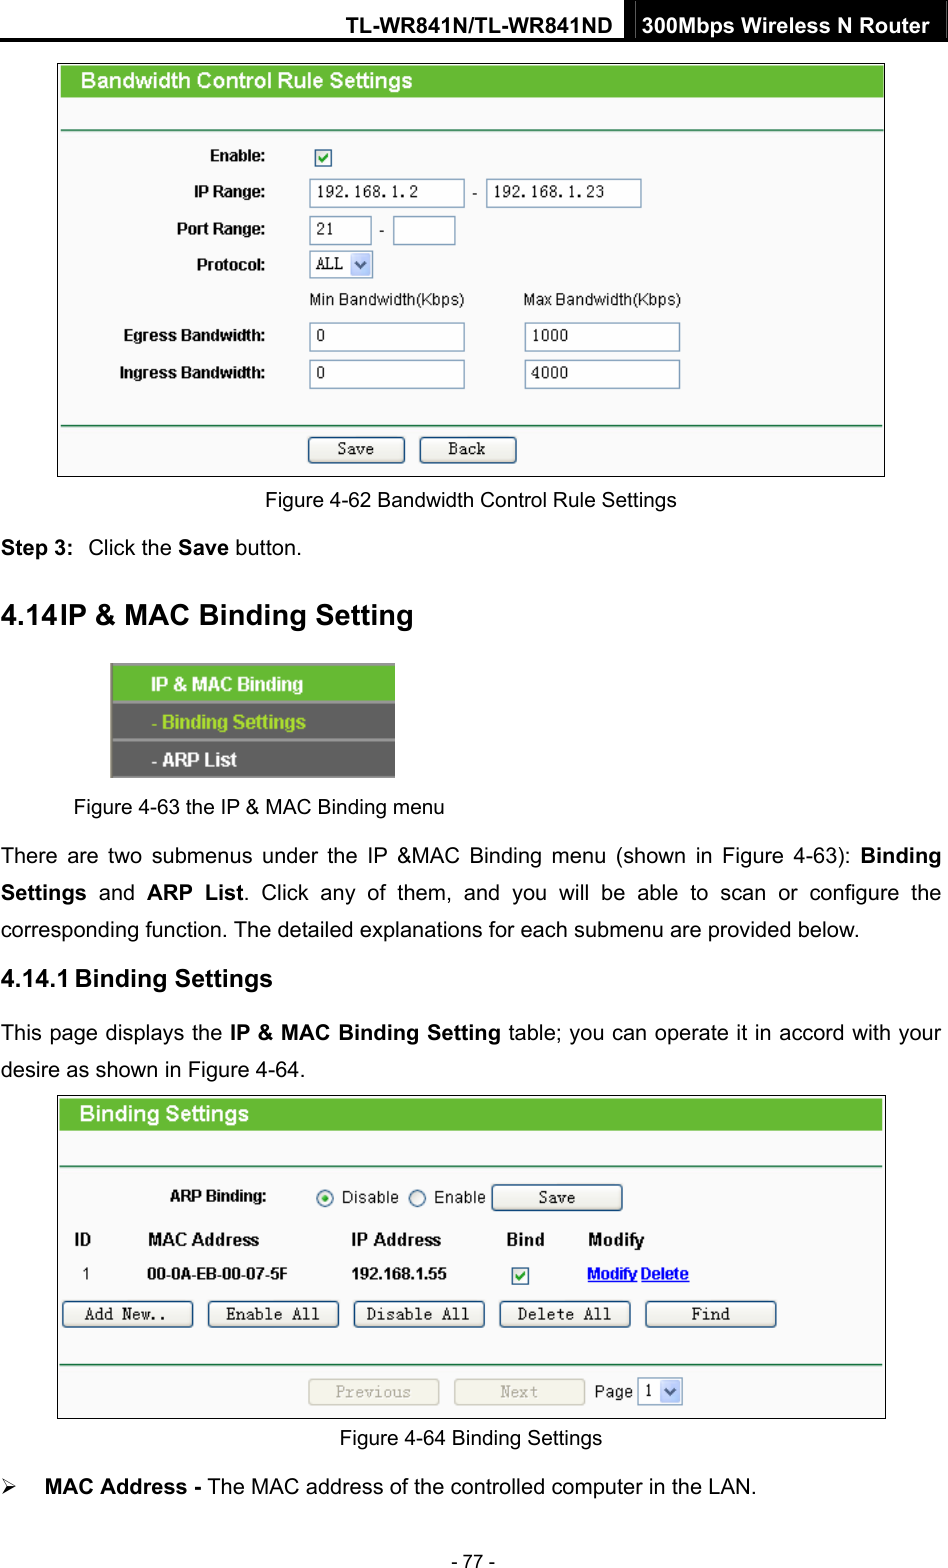 TL-WR841N/TL-WR841ND 300Mbps Wireless N Router - 77 -  Figure 4-62 Bandwidth Control Rule Settings Step 3:  Click the Save button. 4.14 IP &amp; MAC Binding Setting  Figure 4-63 the IP &amp; MAC Binding menu There are two submenus under the IP &amp;MAC Binding menu (shown in Figure 4-63):  Binding Settings  and ARP List. Click any of them, and you will be able to scan or configure the corresponding function. The detailed explanations for each submenu are provided below. 4.14.1 Binding Settings This page displays the IP &amp; MAC Binding Setting table; you can operate it in accord with your desire as shown in Figure 4-64.   Figure 4-64 Binding Settings ¾ MAC Address - The MAC address of the controlled computer in the LAN.   